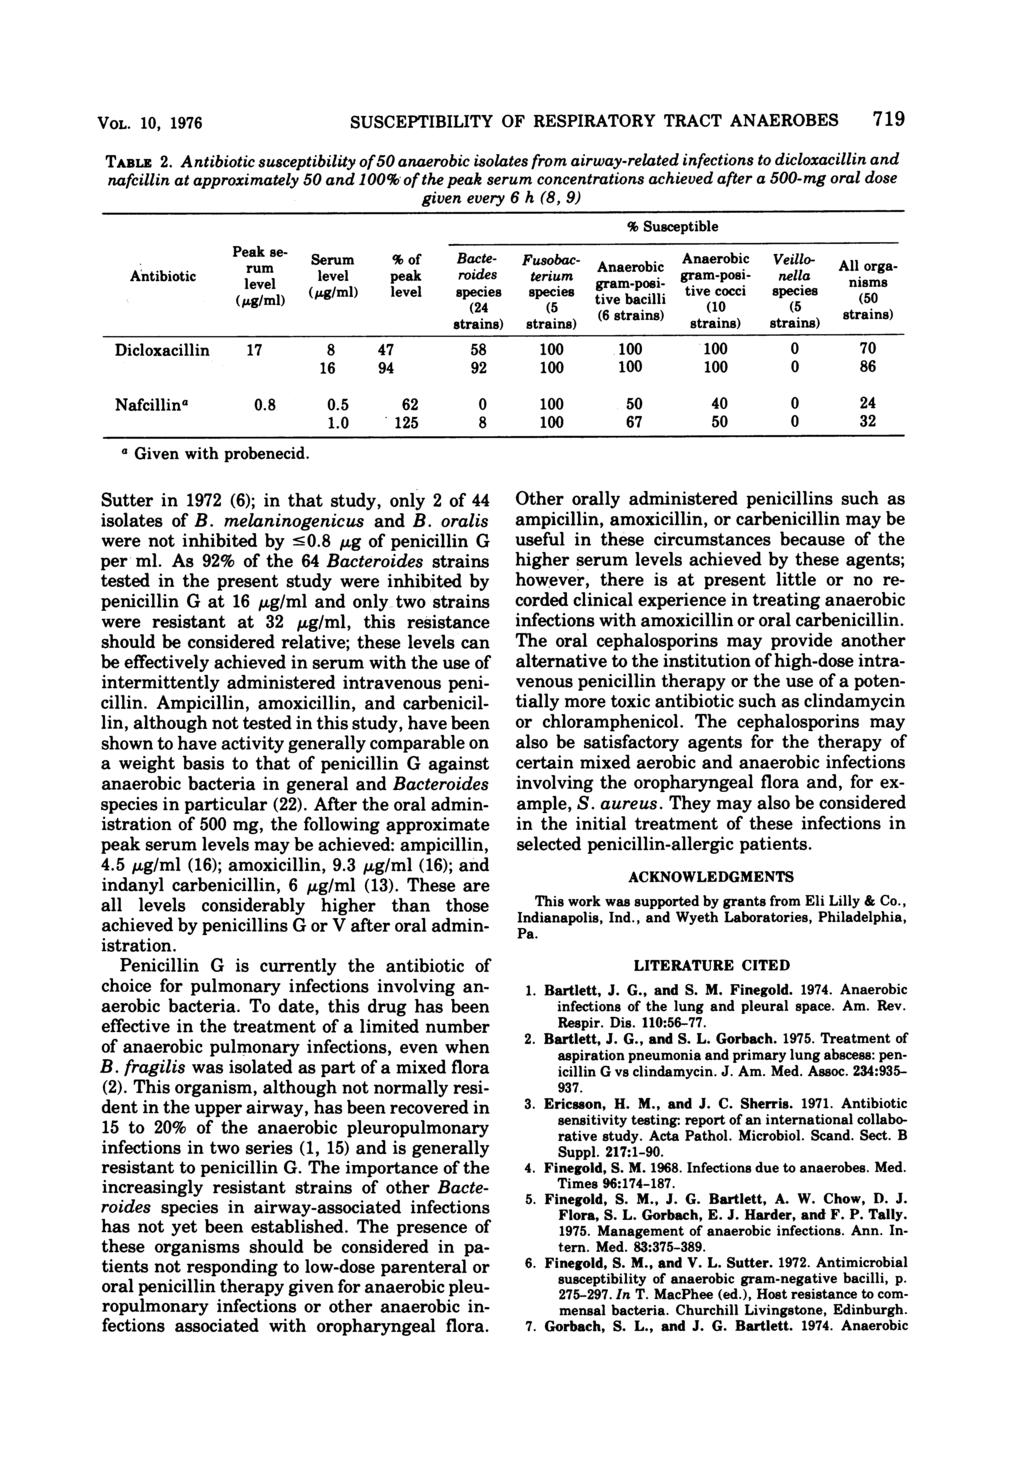 VOL. 10, 1976 SUSCEPTIBILITY OF RESPIRATORY TRACT ANAEROBES 719 TABLE 2.